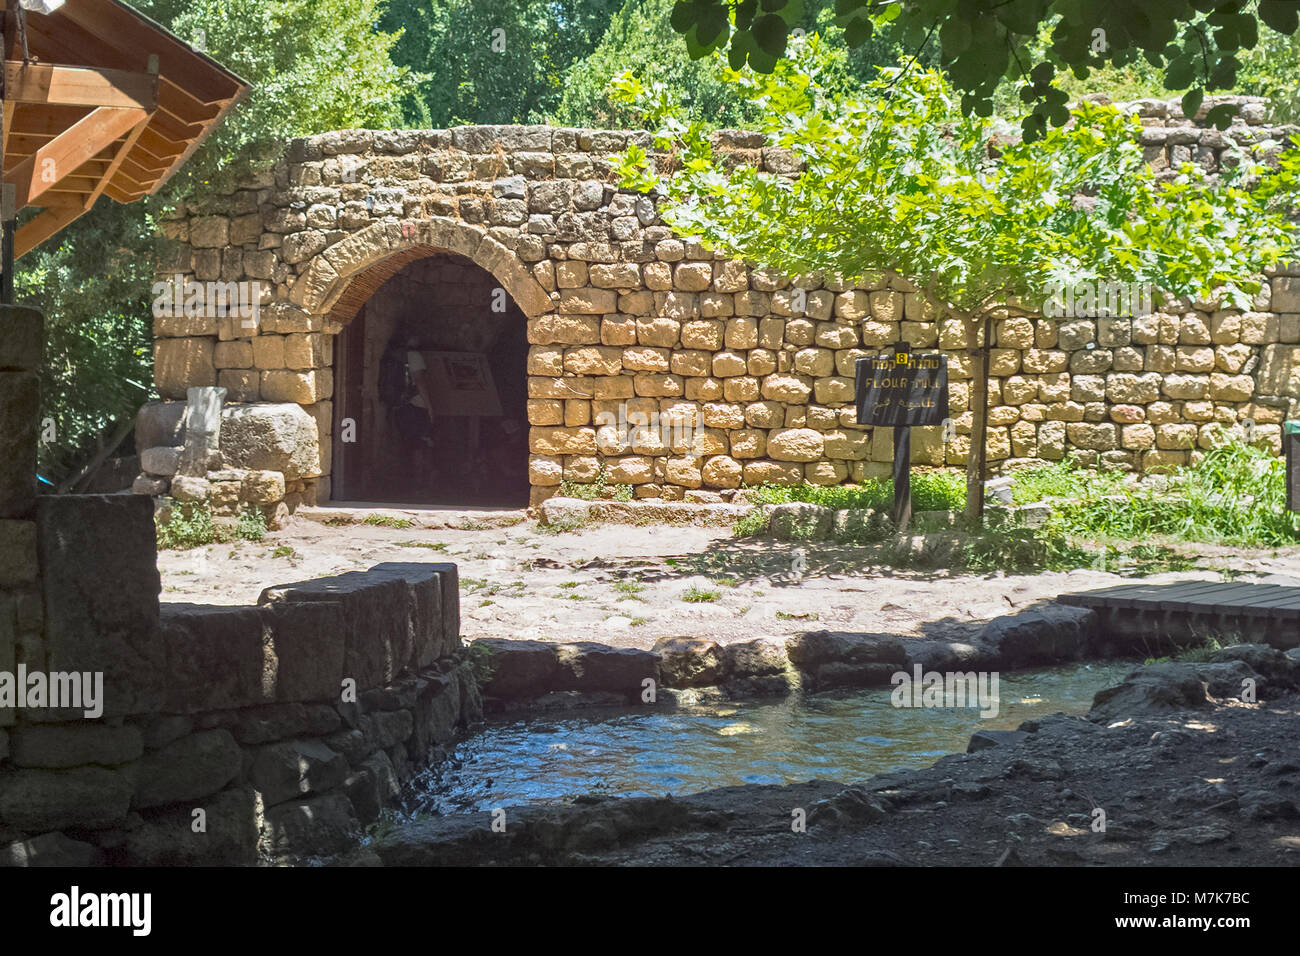 three hundred year old flour mill that is still usable in Banias Park in the Golan Heights Stock Photo